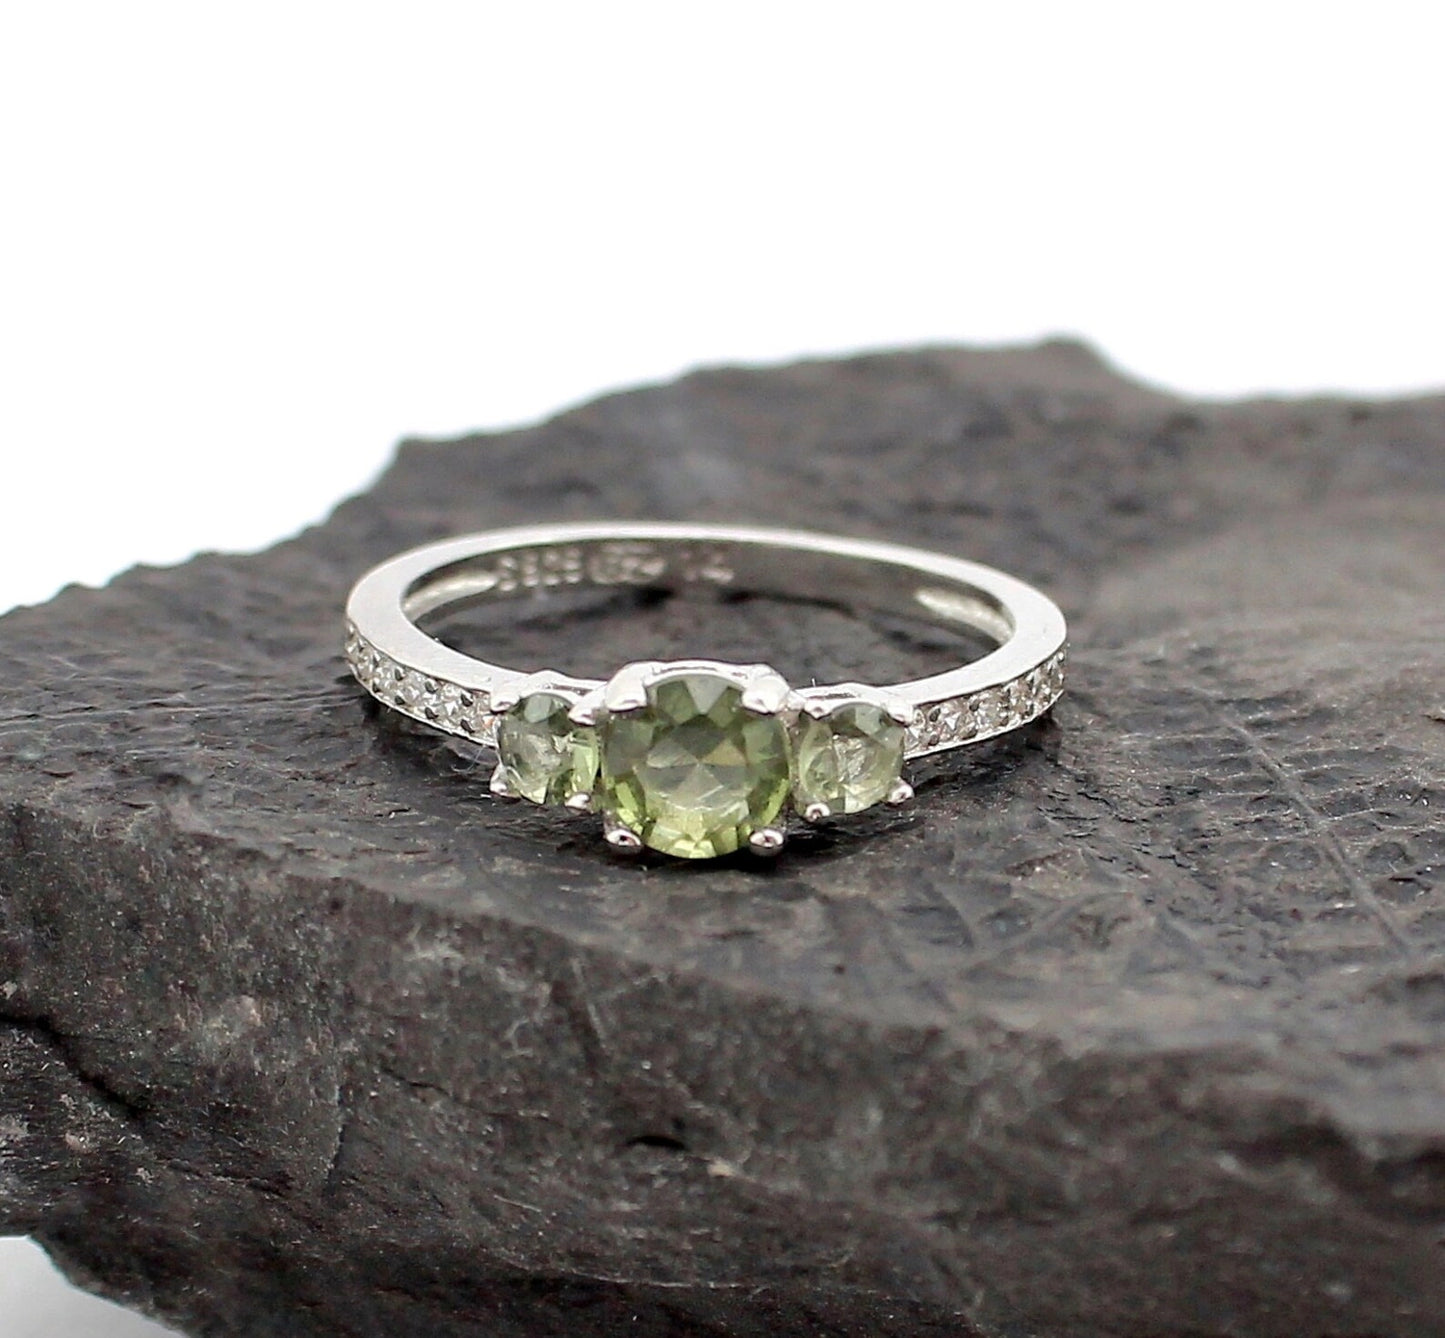 Genuine MOLDAVITE ring 5mm stone, Sterling Silver Moldavite jewelry with certification, real moldavite ring authentic moldavite jewellery